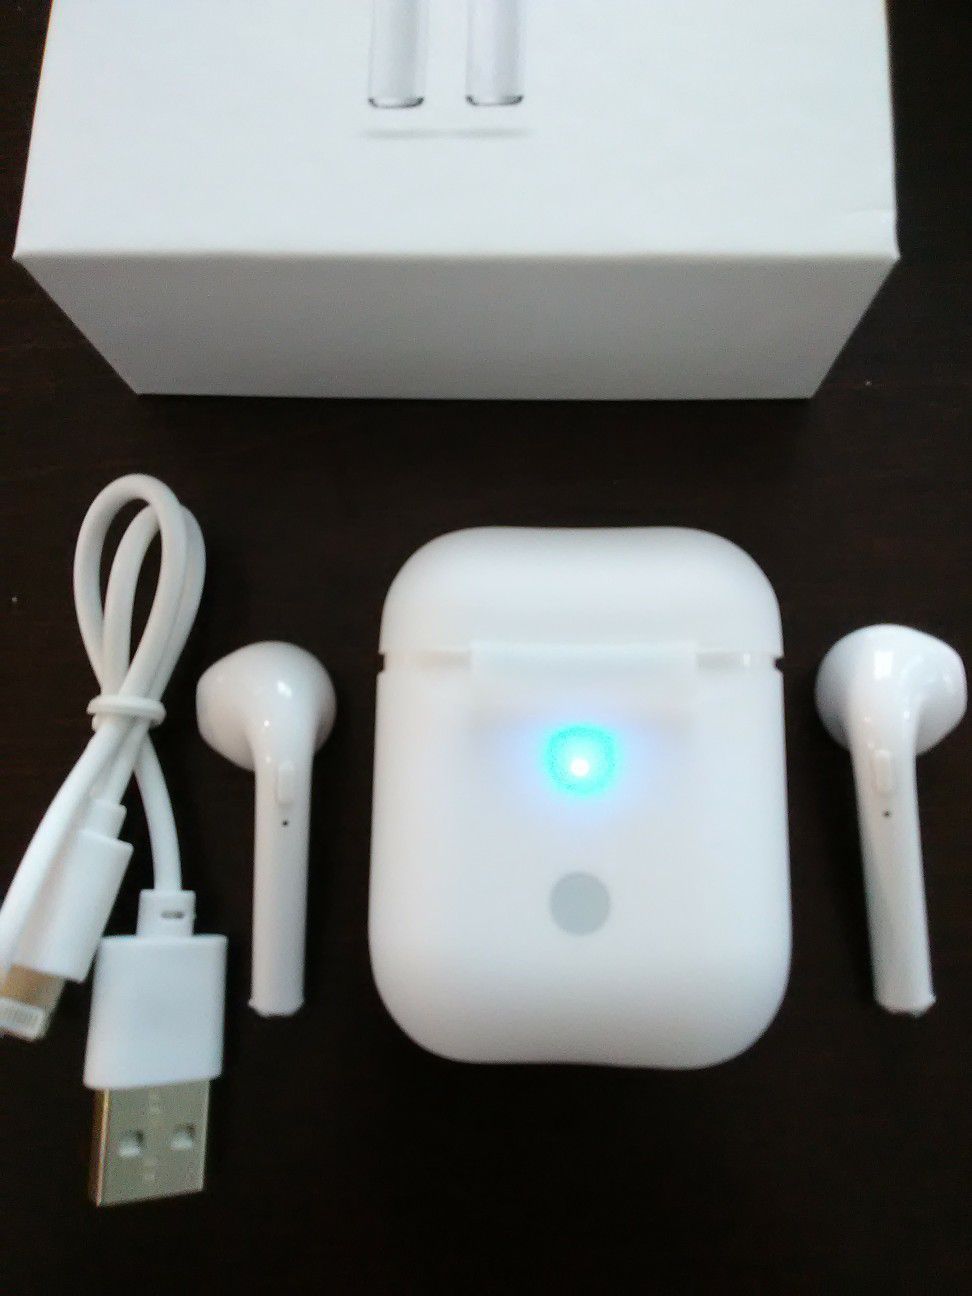 Brand new mini white wireless Bluetooth headphones earbuds with wireless charger box included. These are not airpods but same size